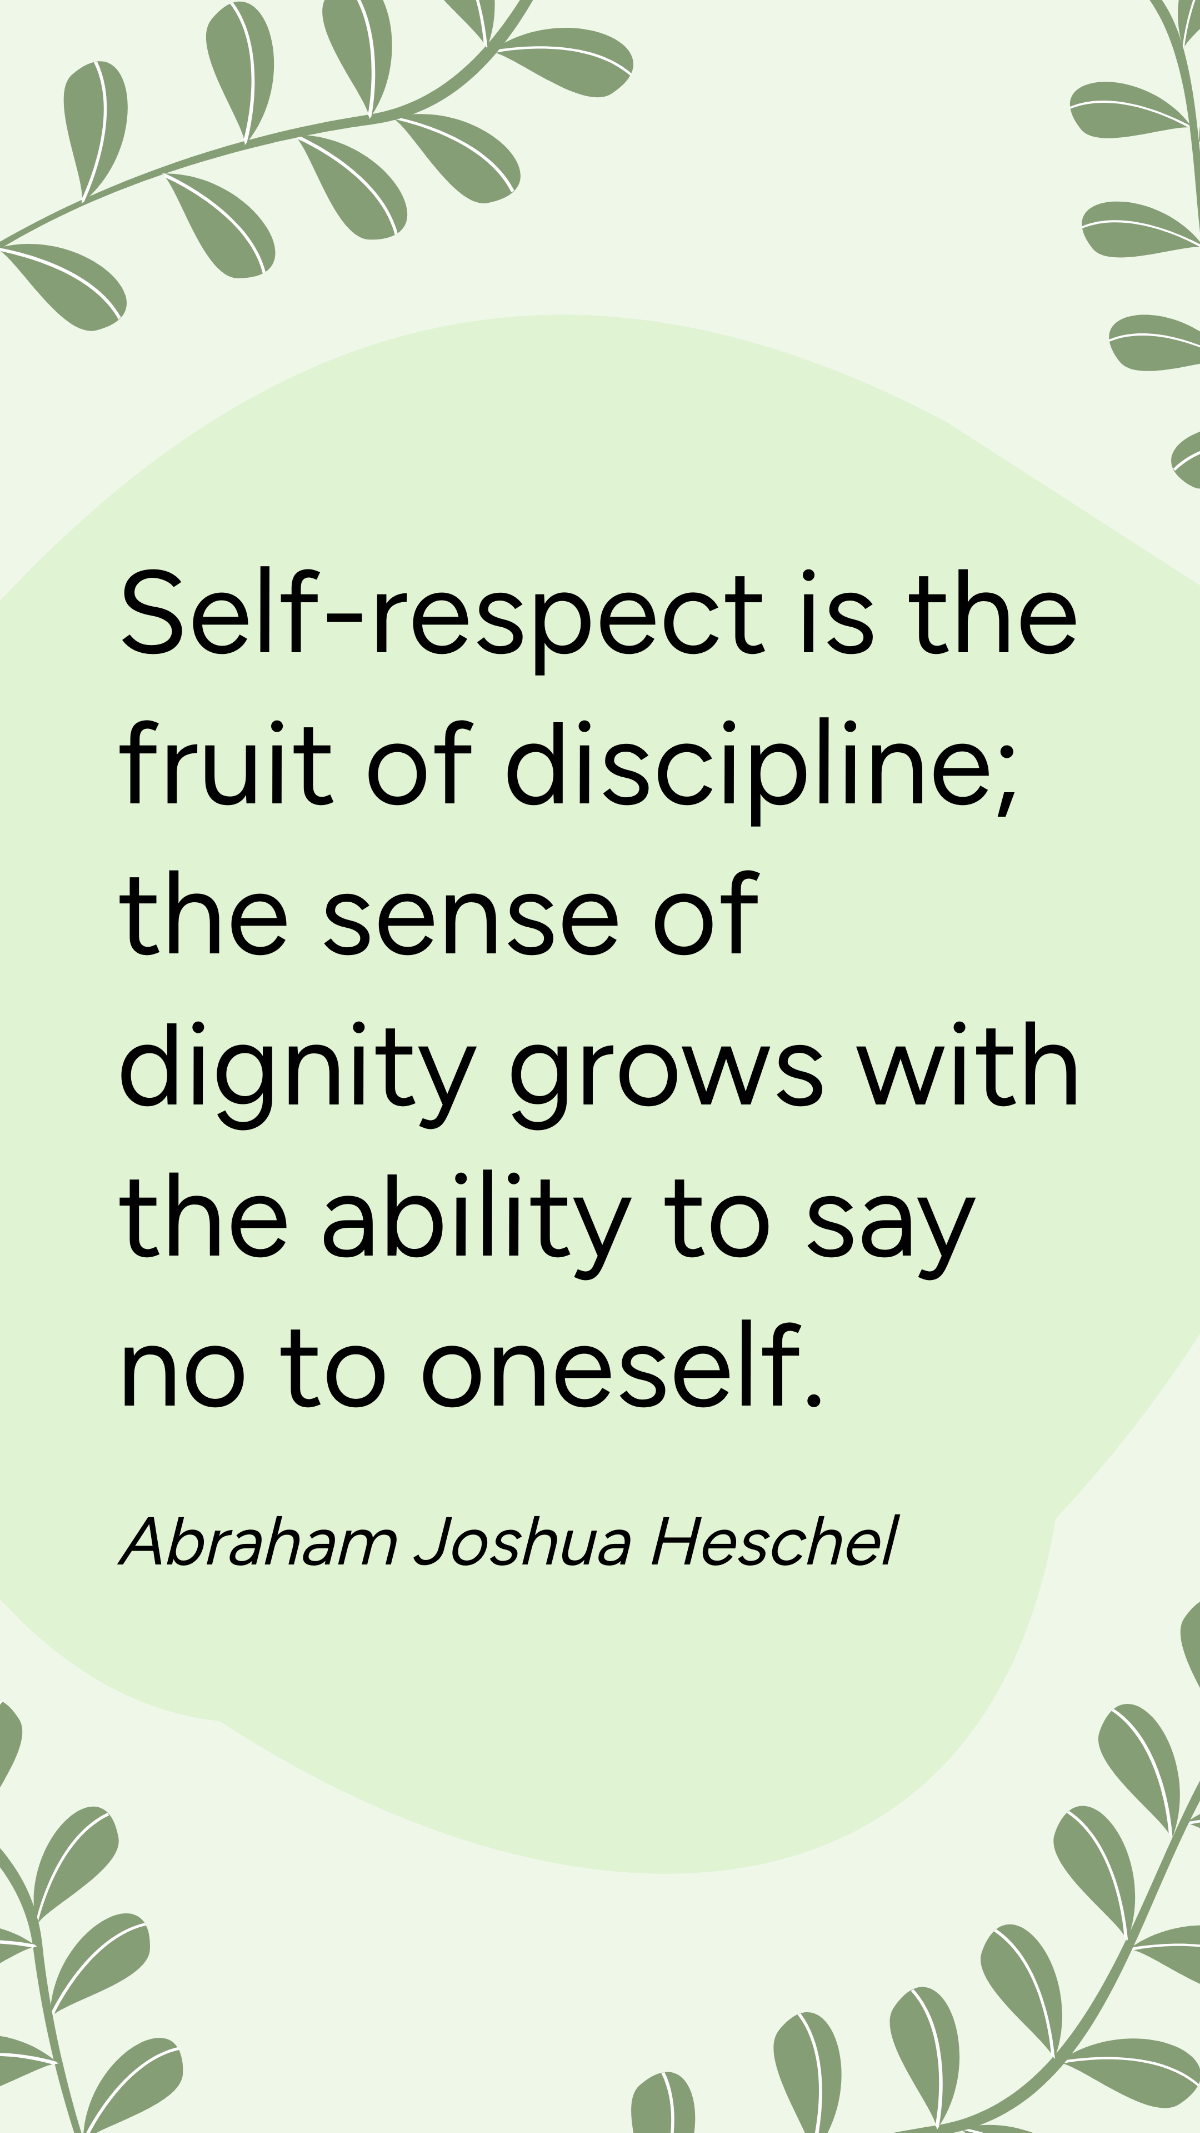 Abraham Joshua Heschel - Self-respect is the fruit of discipline; the sense of dignity grows with the ability to say no to oneself. Template